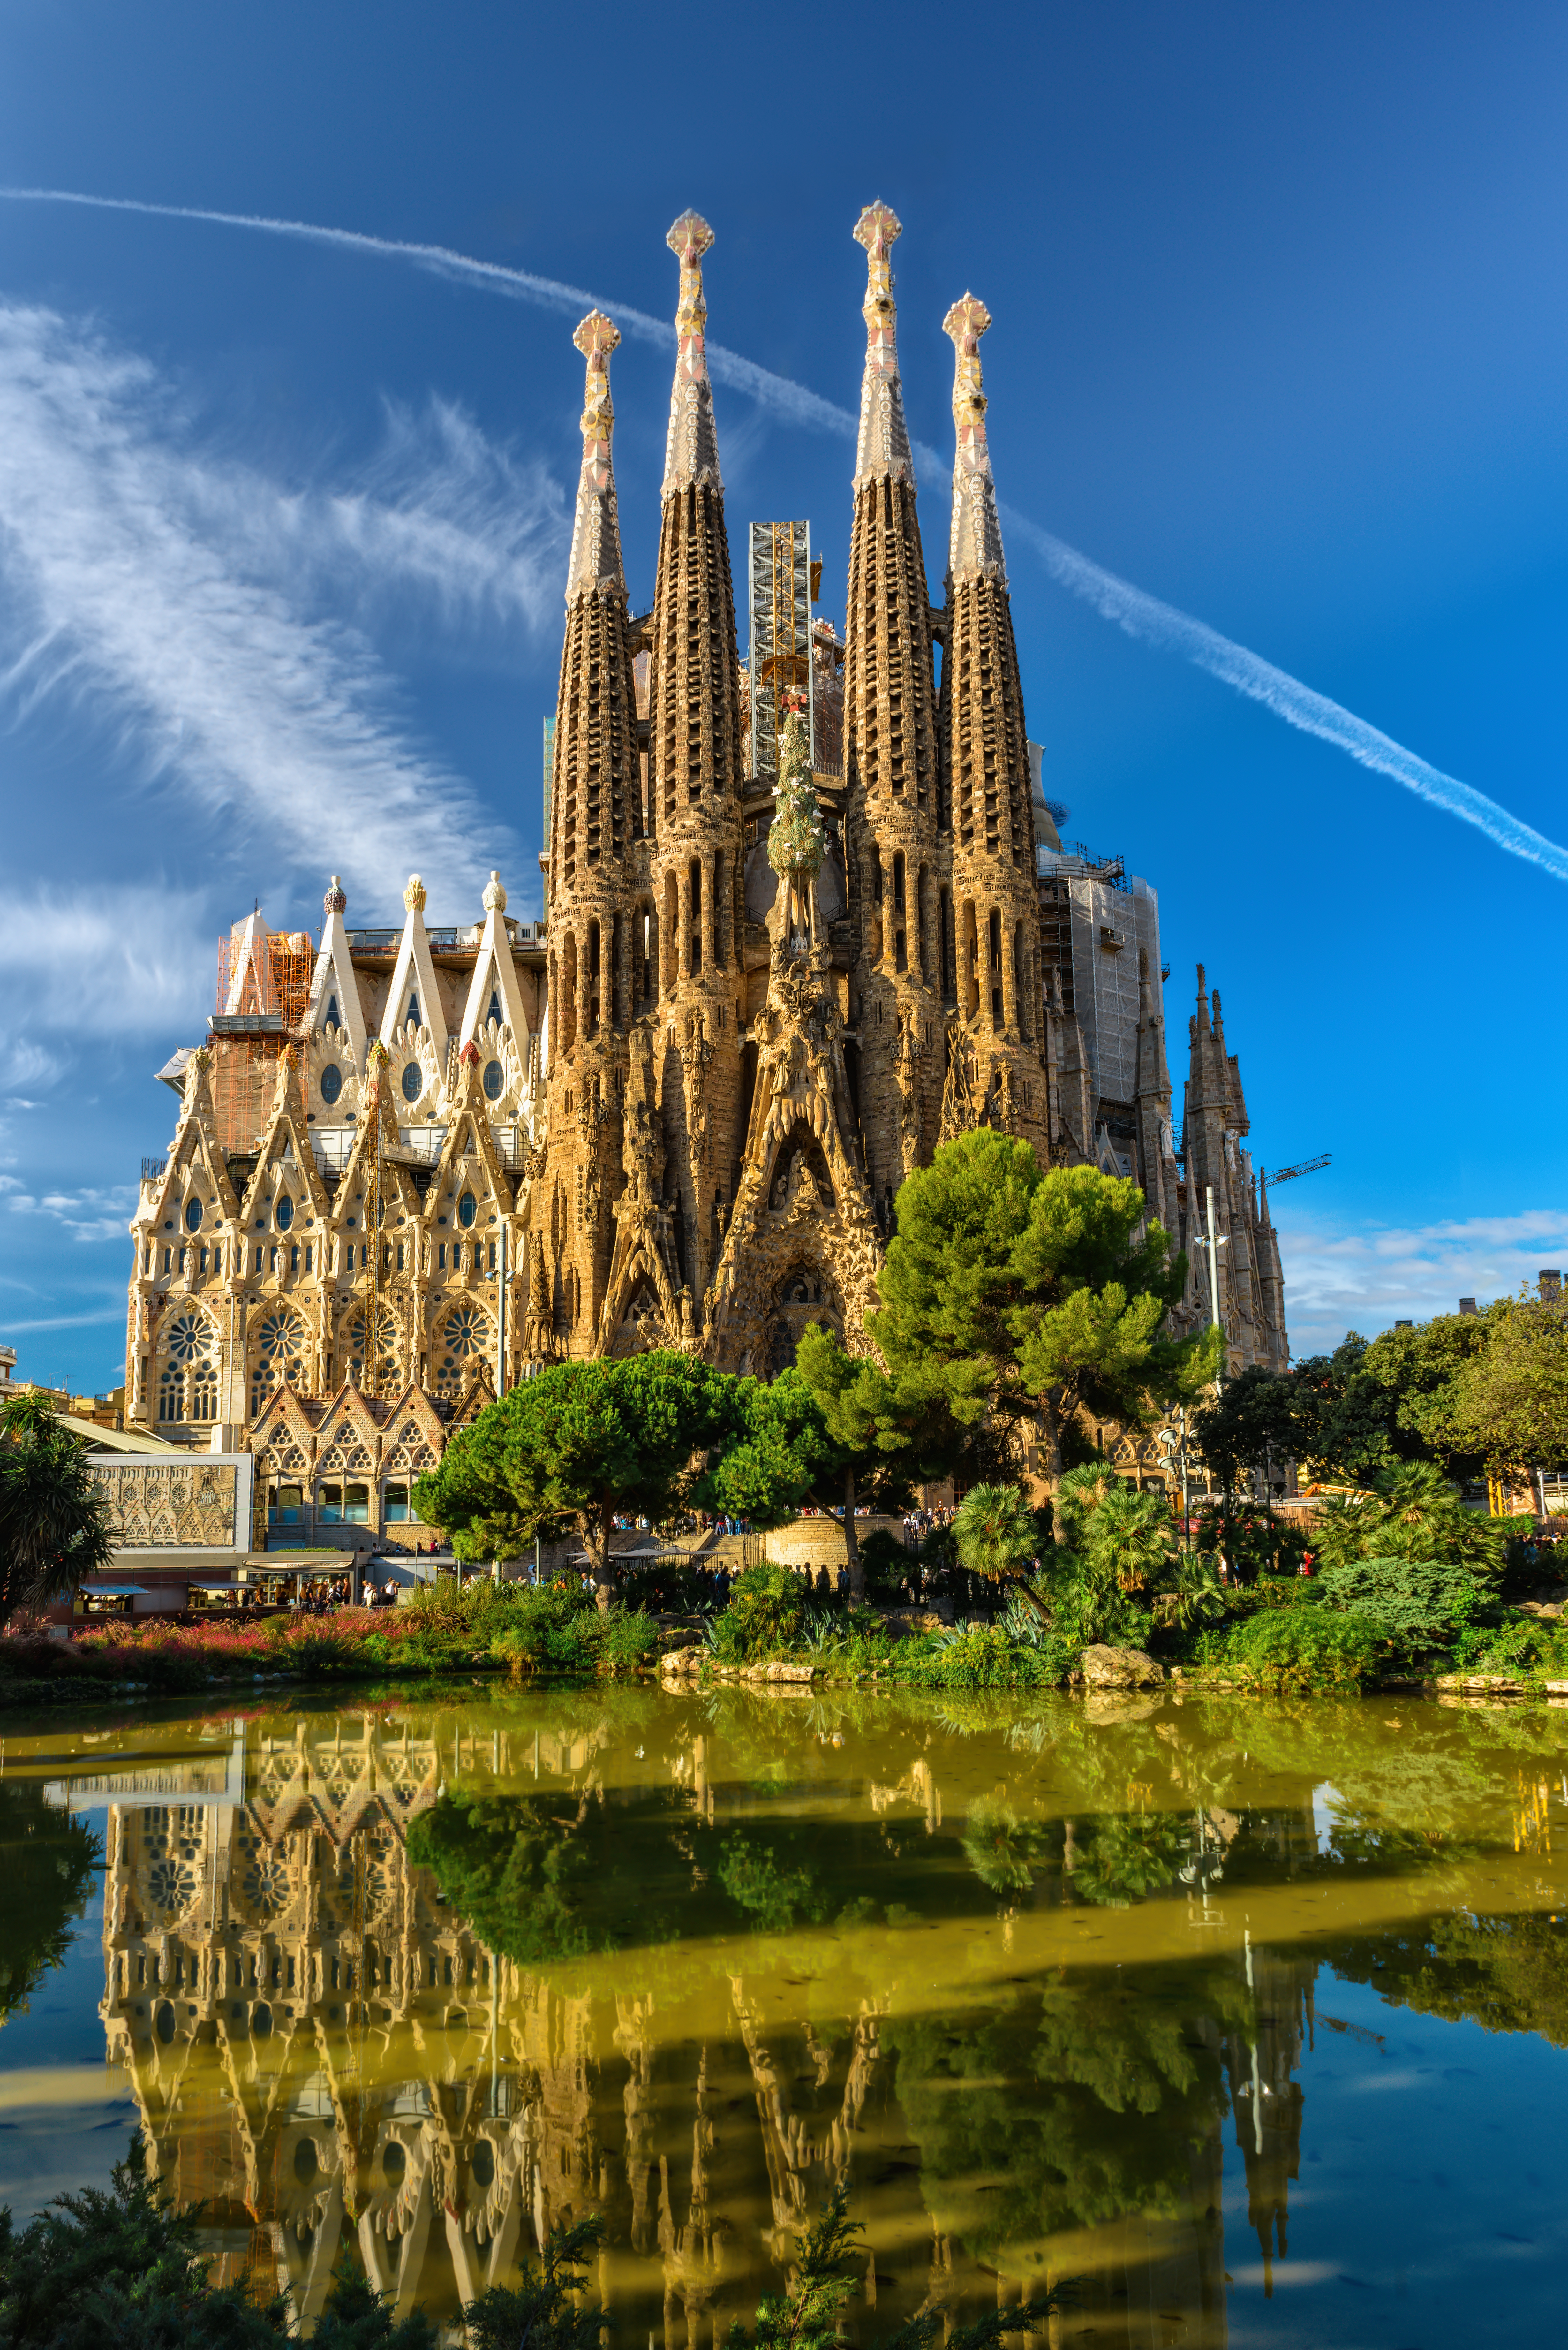 Cathedral of La Sagrada Familia. It is designed by architector Antonio Gaudi andl is being build since 1882.